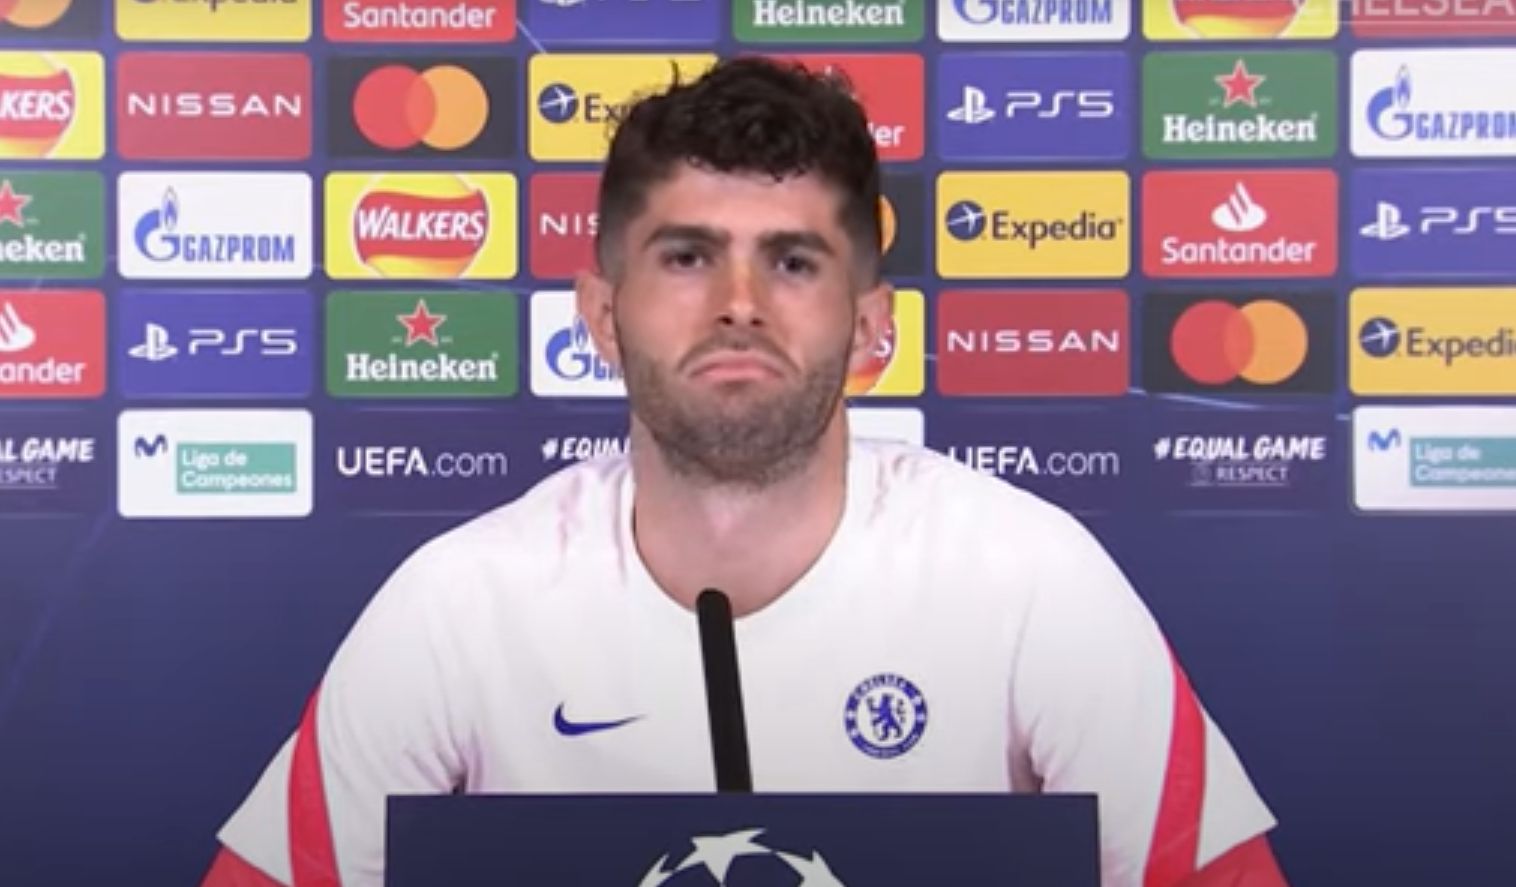 Video): Christian Pulisic insists he&#39;s not &quot;injury prone&quot; despite &quot;tough time&quot; recently » Chelsea News